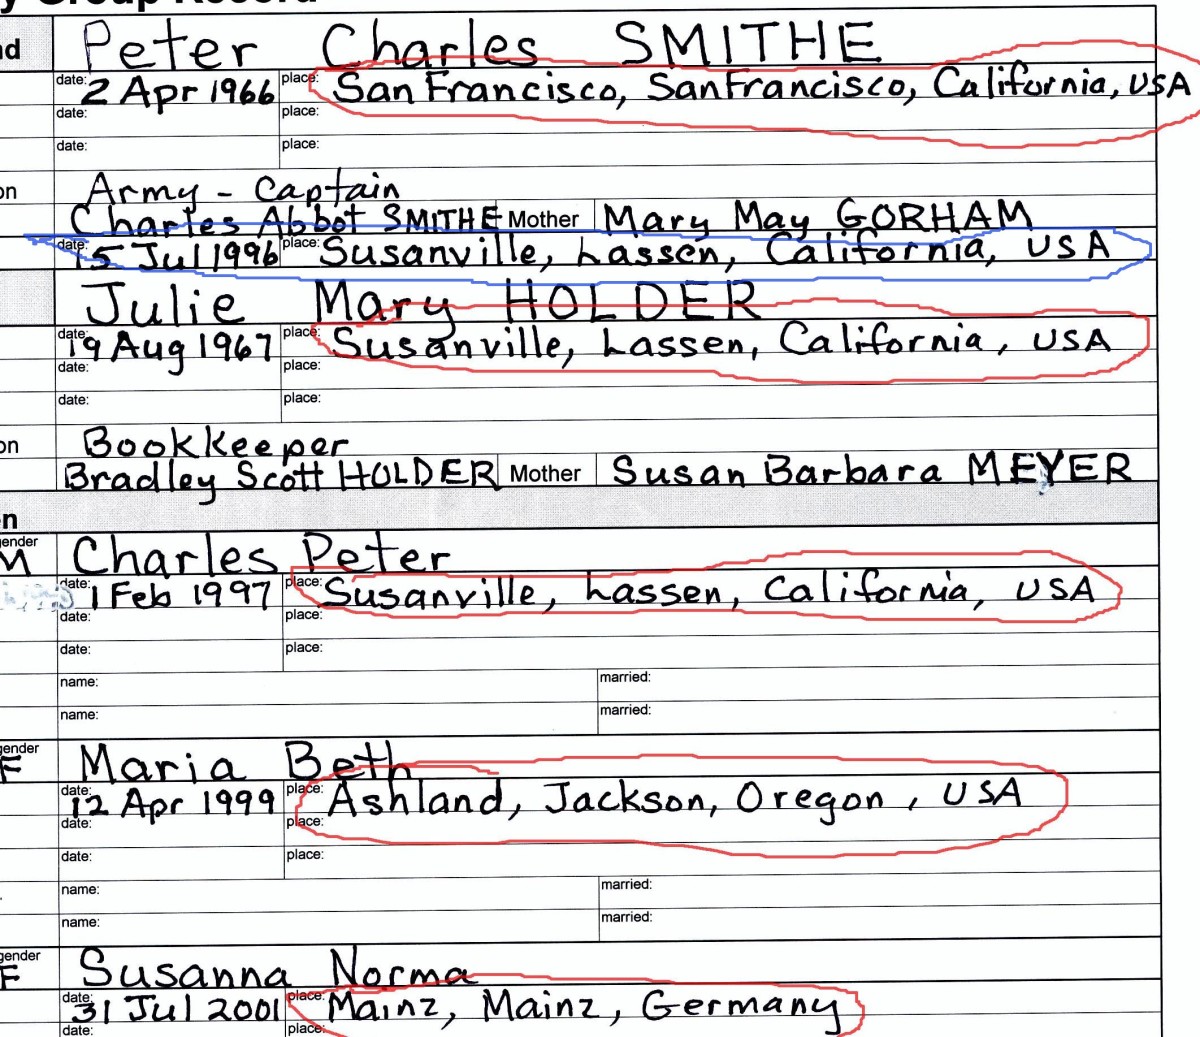 using-the-family-group-sheet-in-genealogy